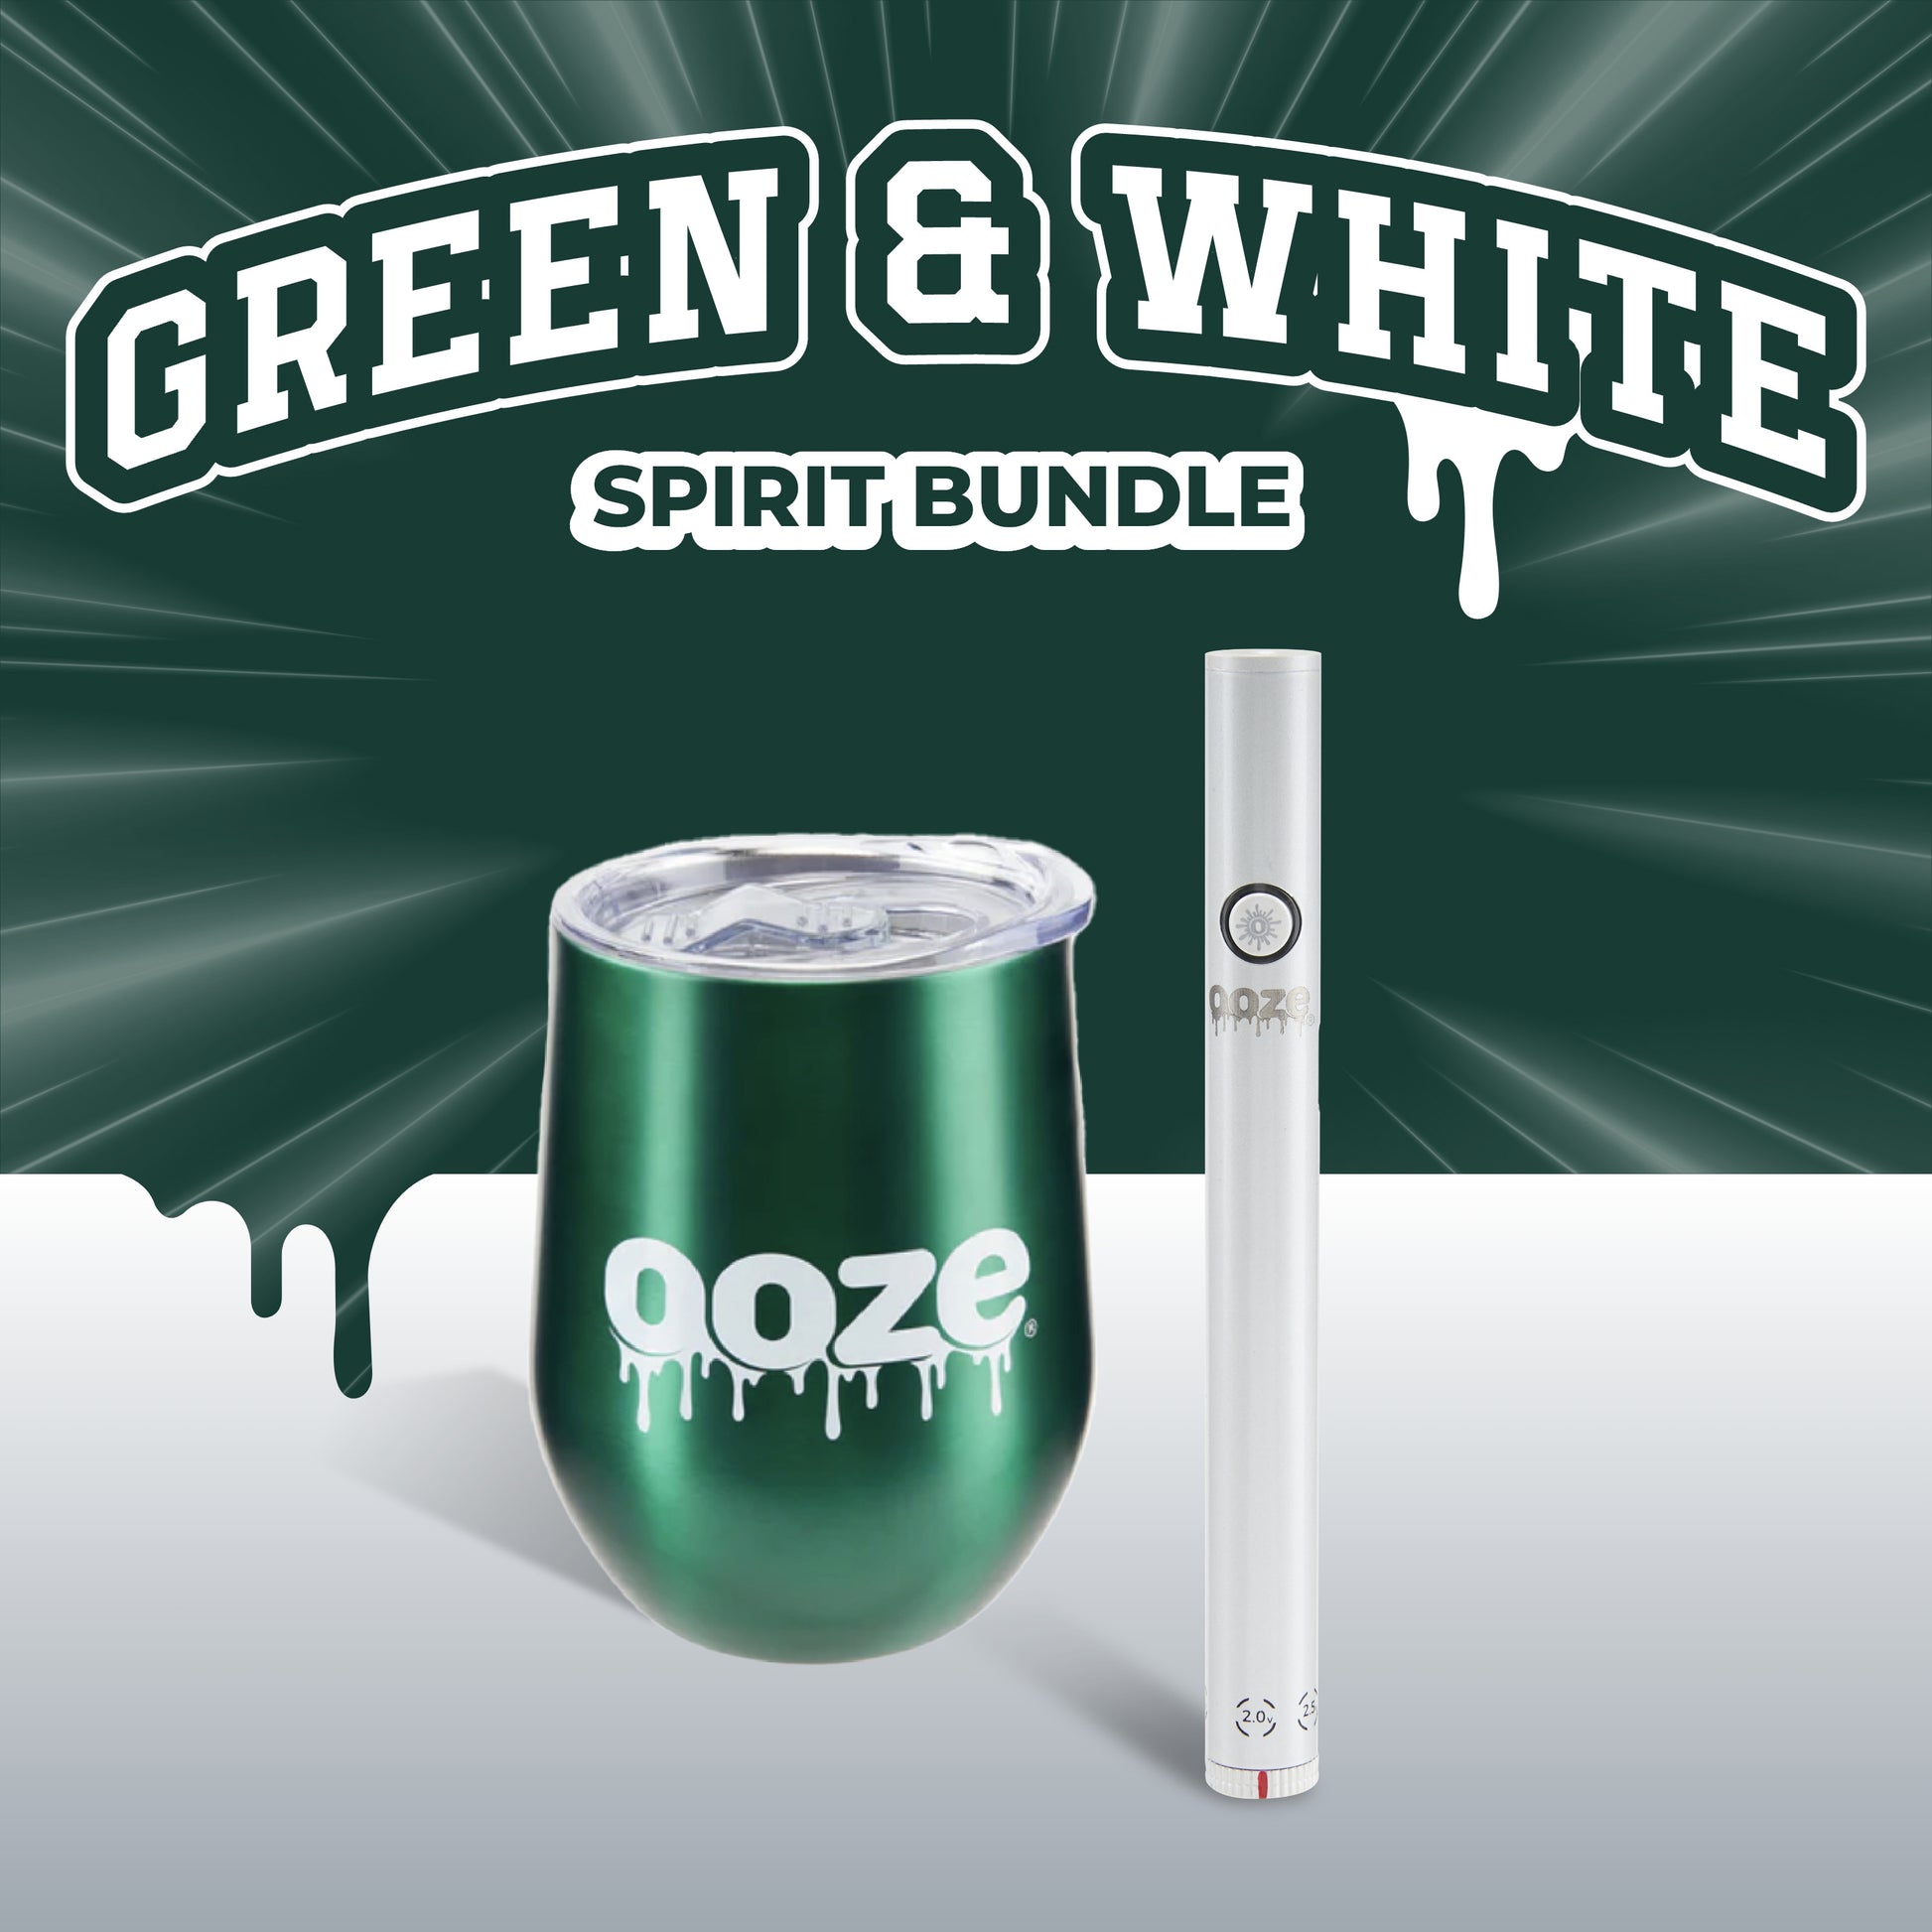 The Green and White Spirit Bundle graphic shows the green Ooze 12oz tumbler and polar pearl Twist Slim Pen 2.0